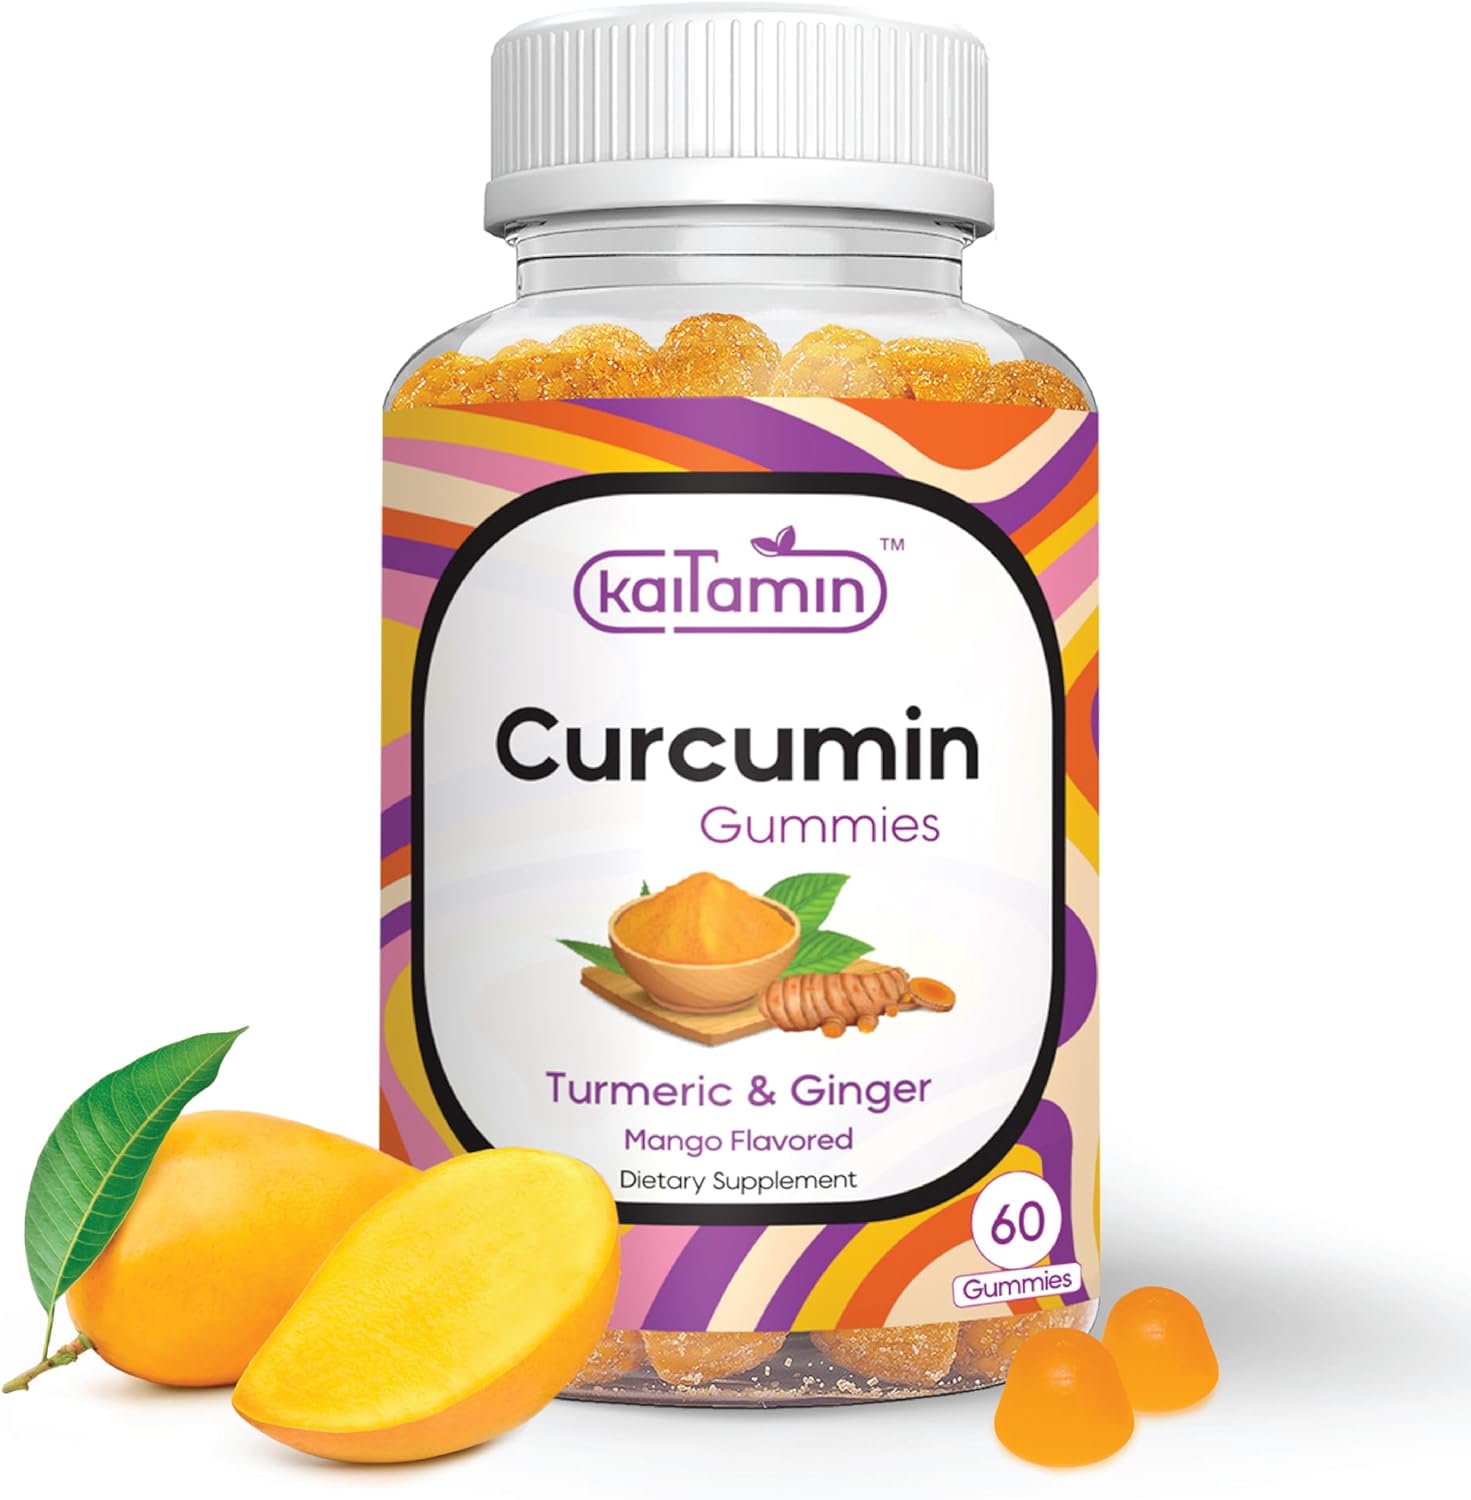 Turmeric Curcumin Supplement with Ginger Root Extract - 60 Gummies Pack, for Joint Support, Digestive Health & Immunity, Rich in Antioxidants, Vegan, Mango Flavored no Aftertaste